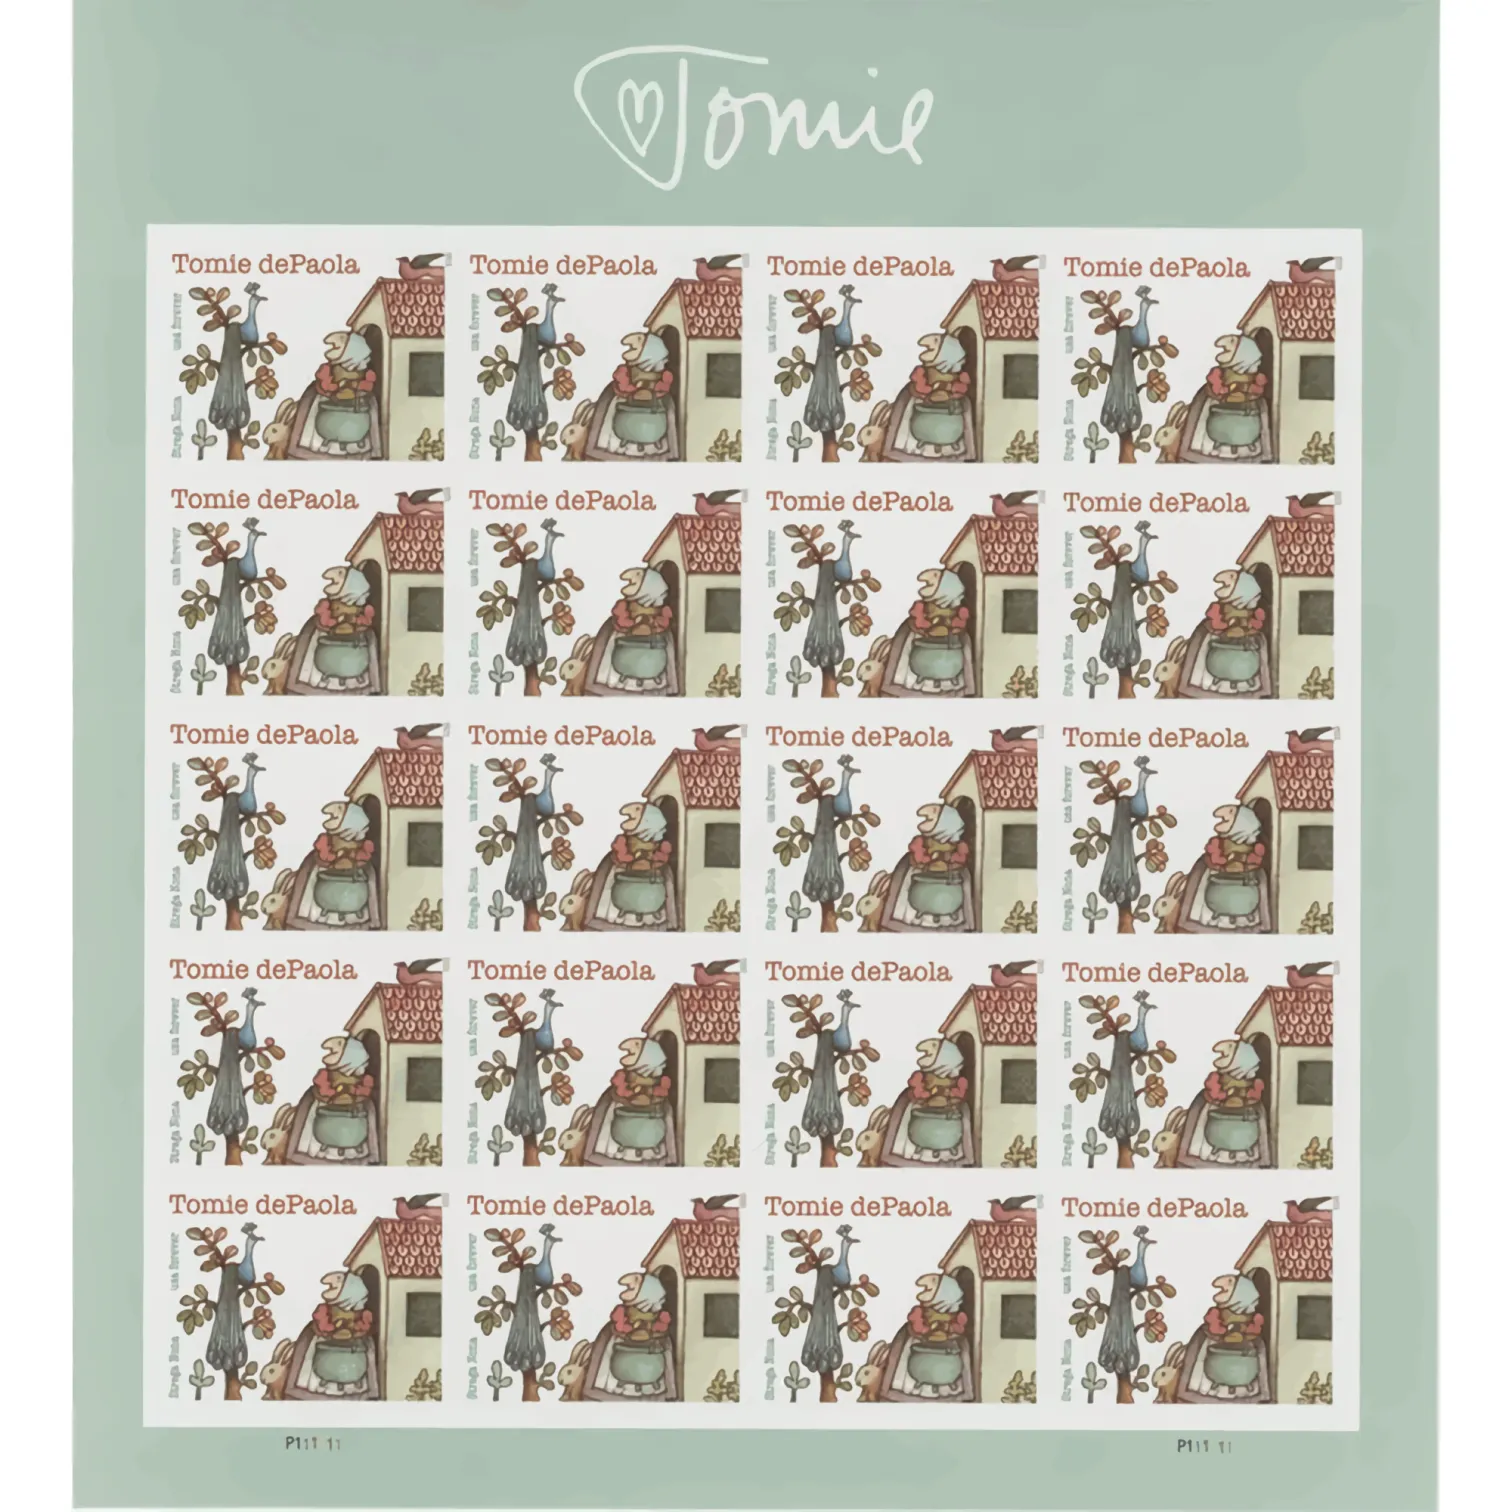 Tomie dePaola Stamps